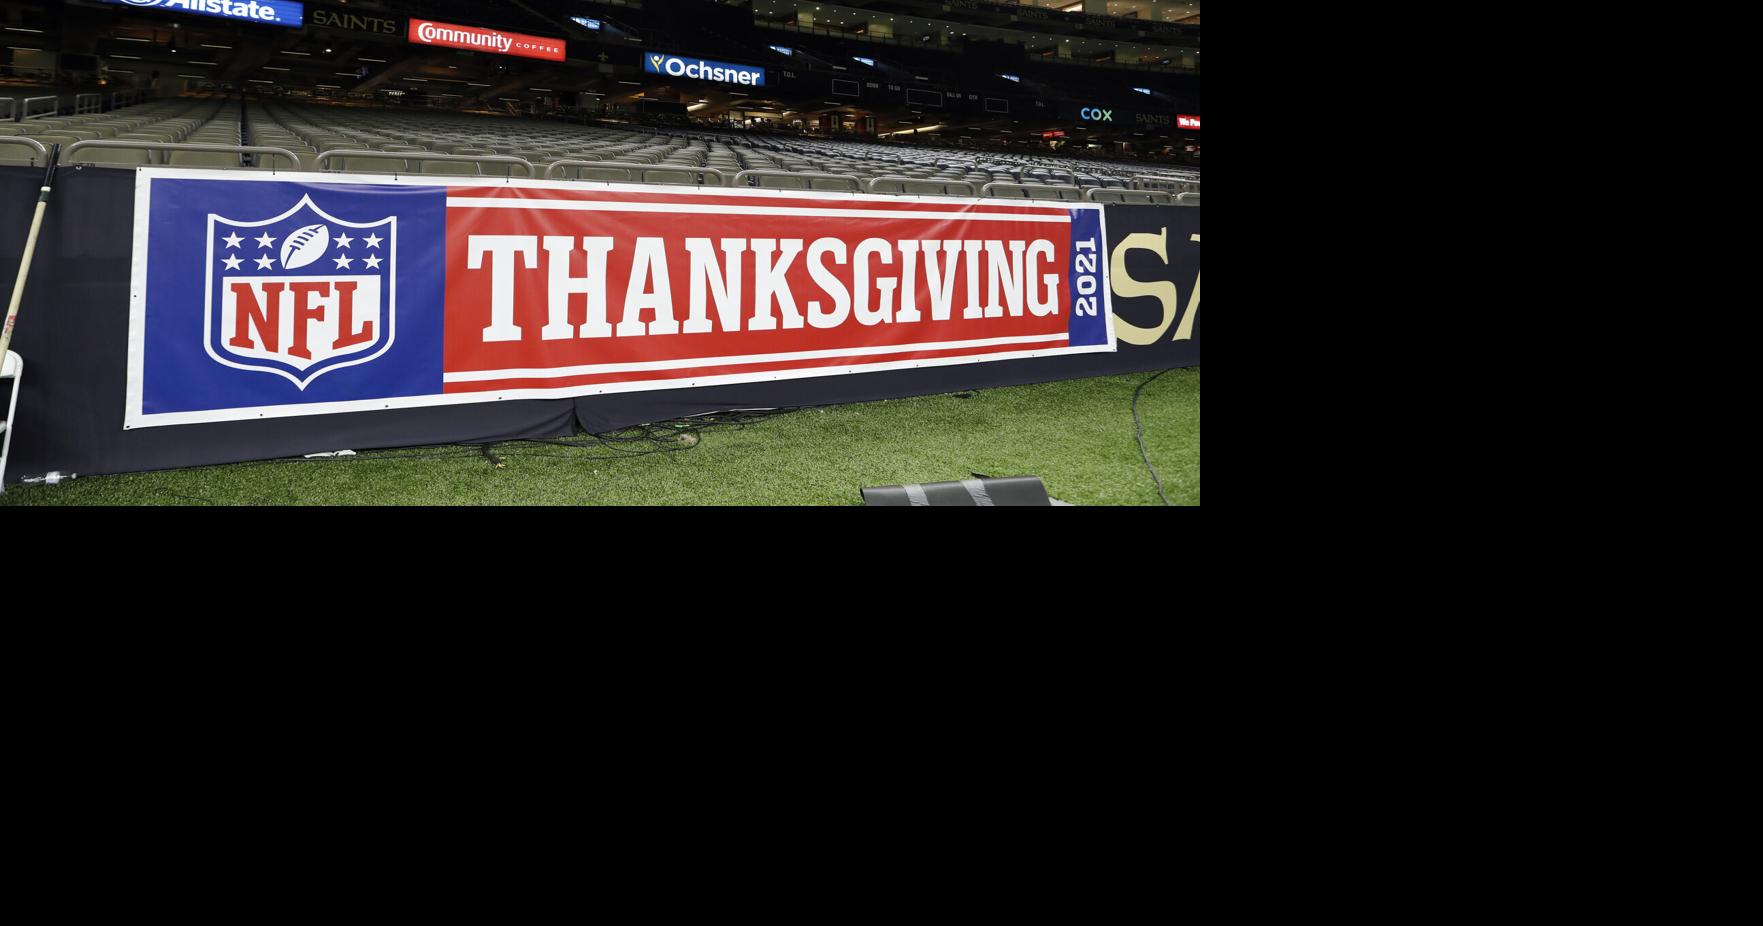 NFL on Thanksgiving FrontPageBets takes a look at top bets for each of